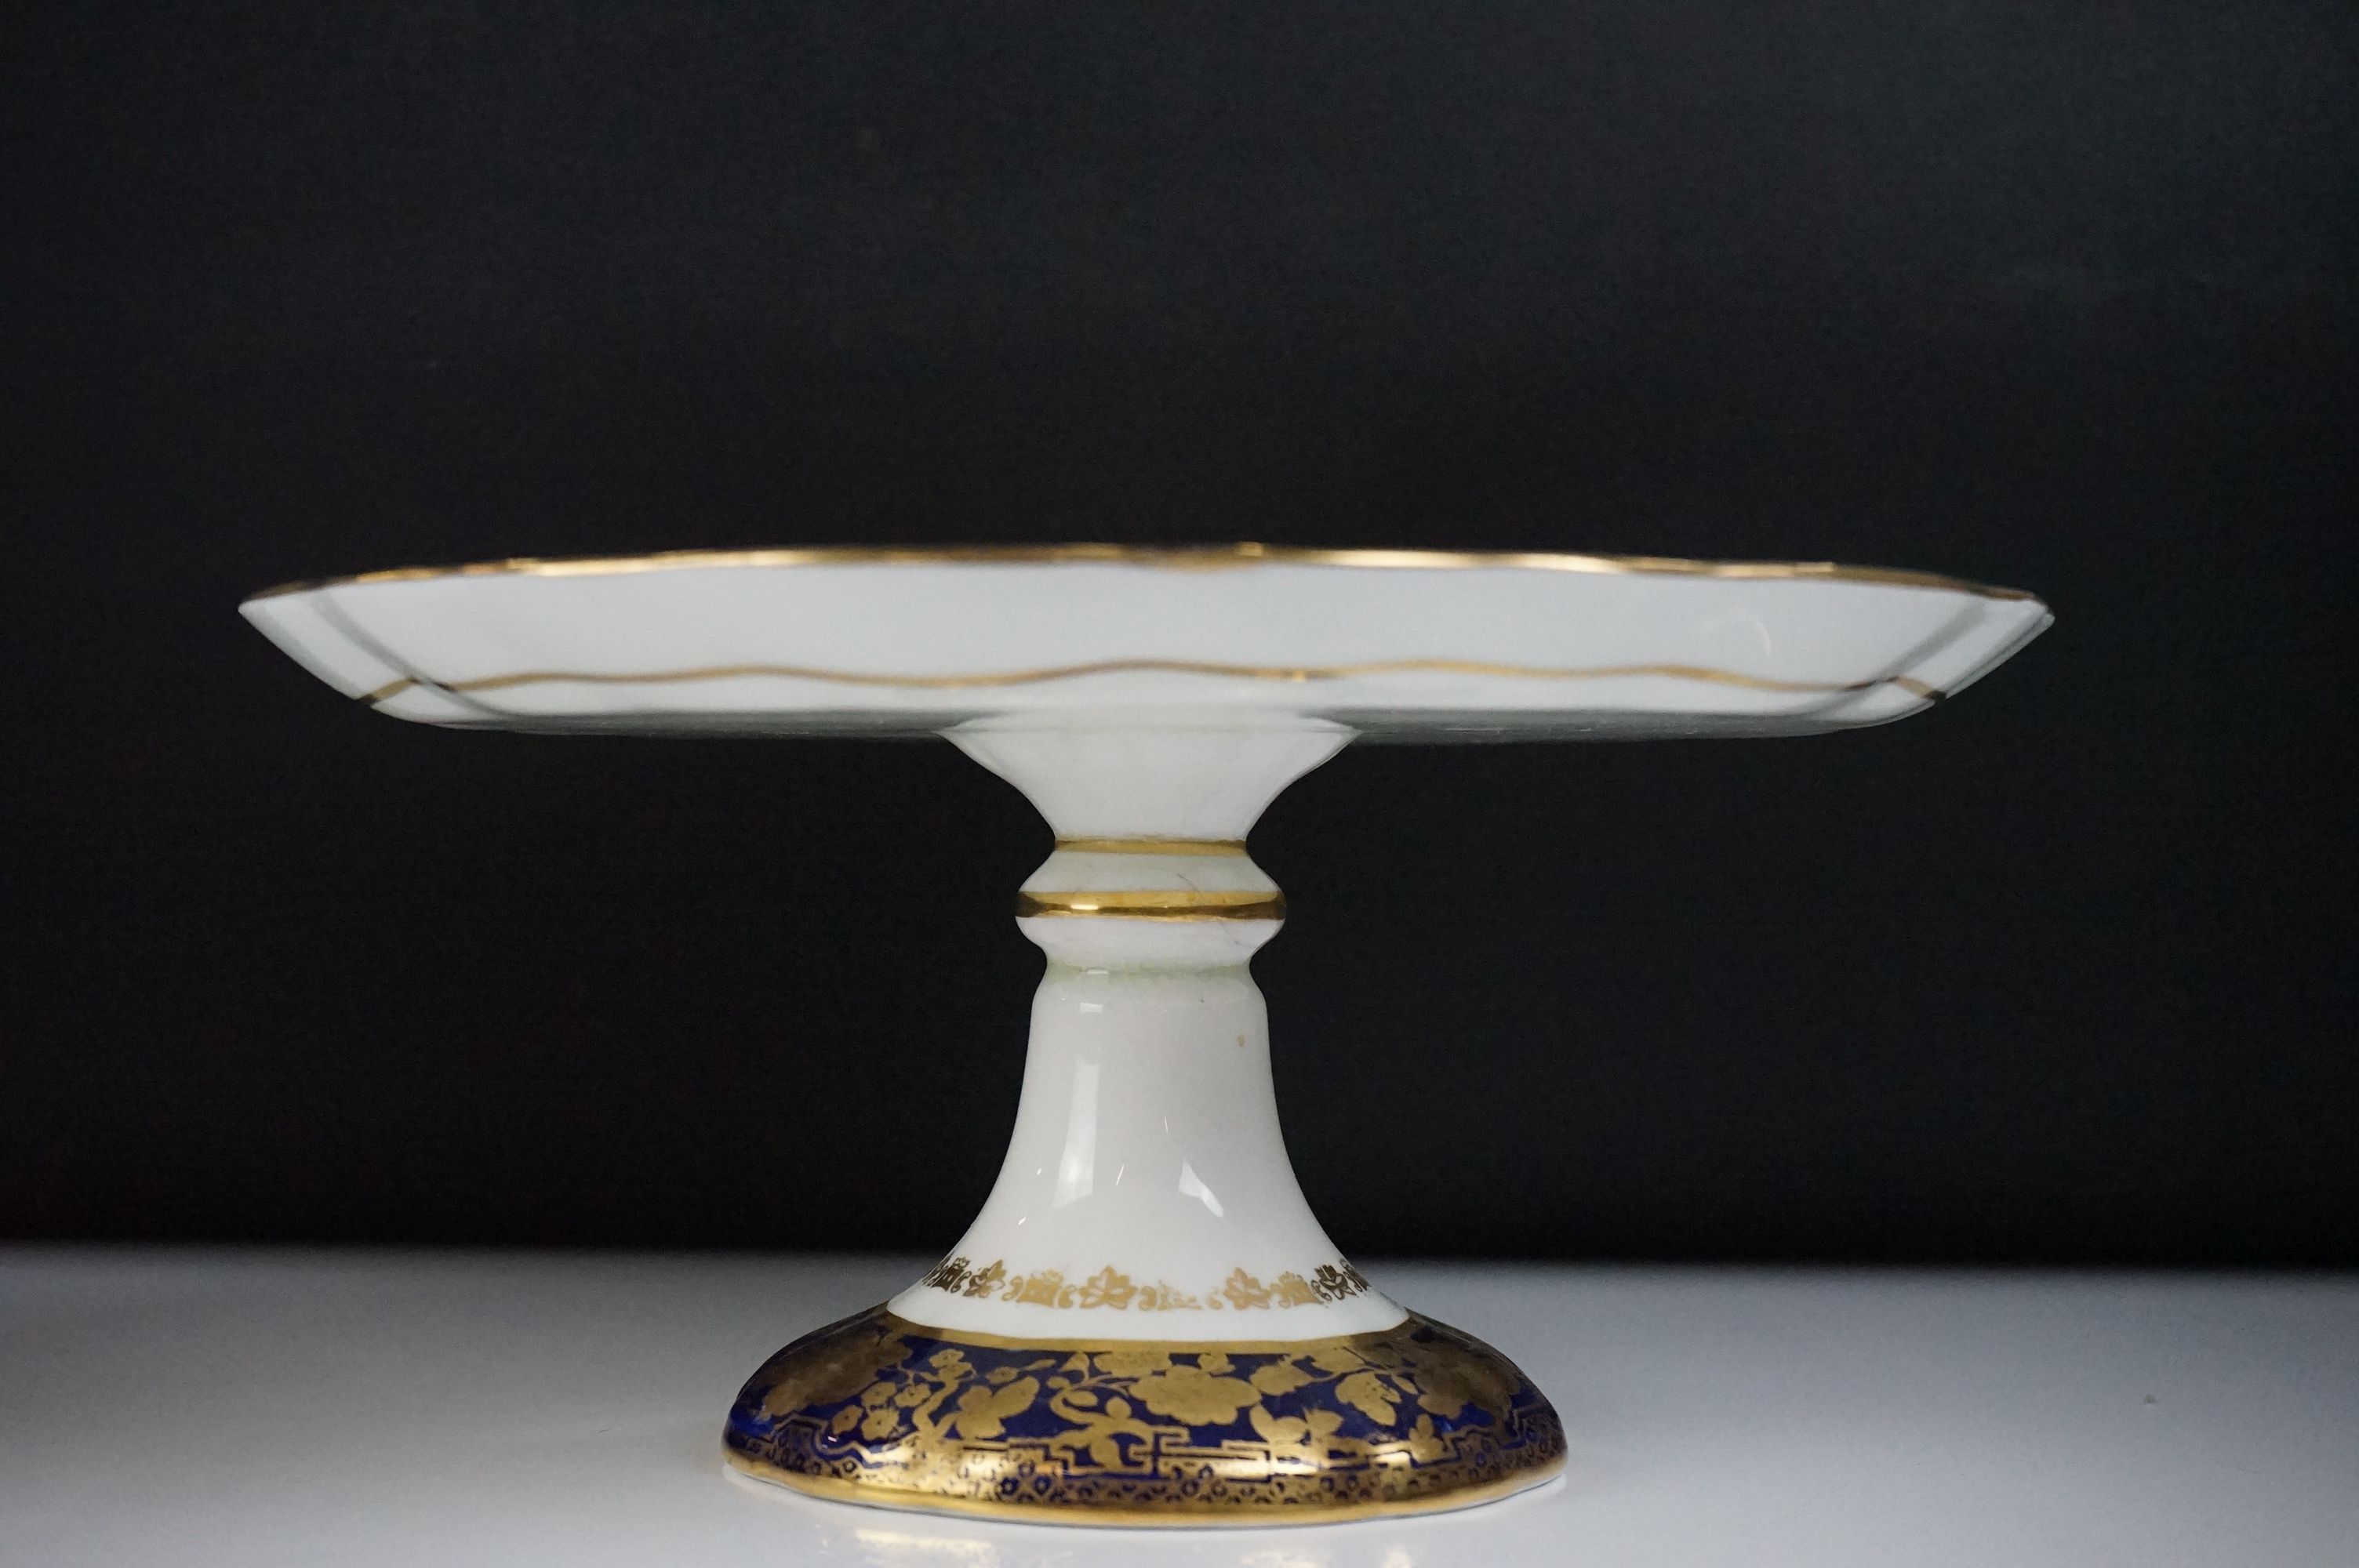 Early 20th Century Hammersley & Co dessert set with gilt foliate decorated borders on cobalt blue - Image 8 of 9